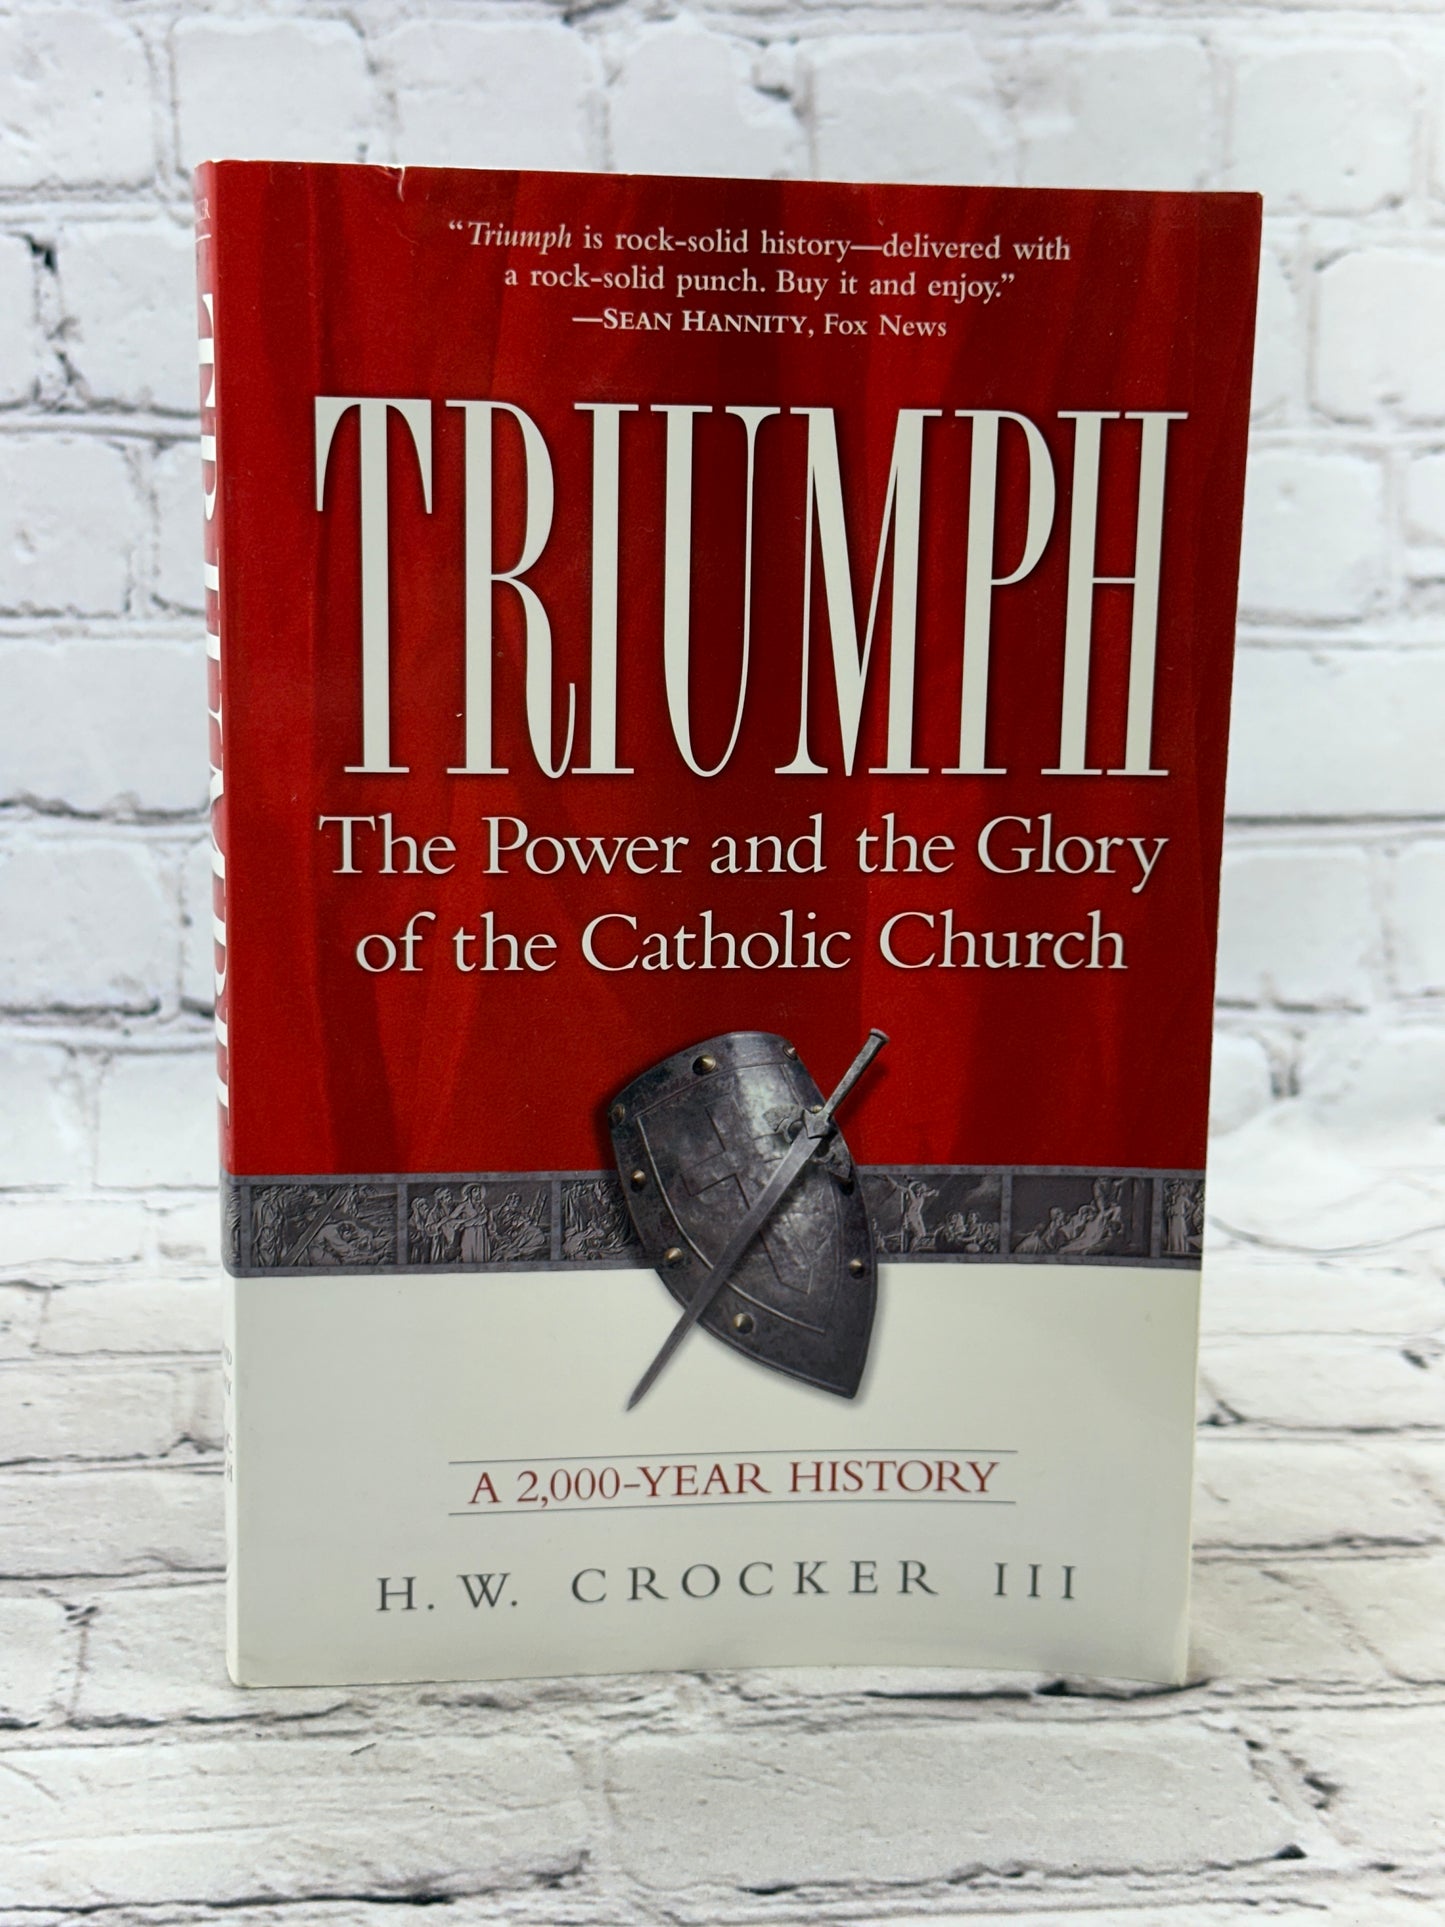 Triumph: The Power and the Glory of the Catholic Church by H.W. Crocker